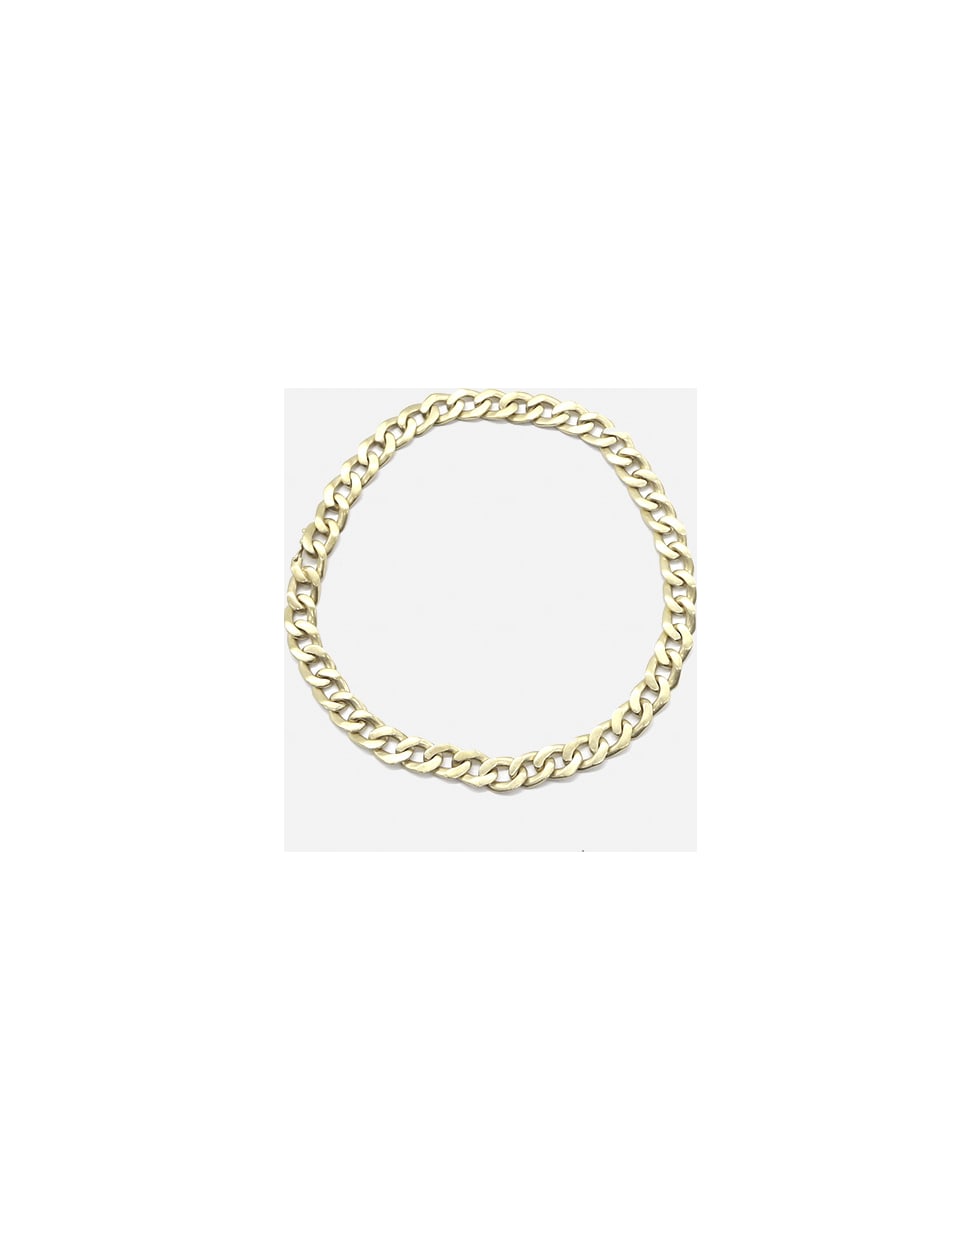 Maison Margiela Oversized Chain Necklace In Silver - Gold